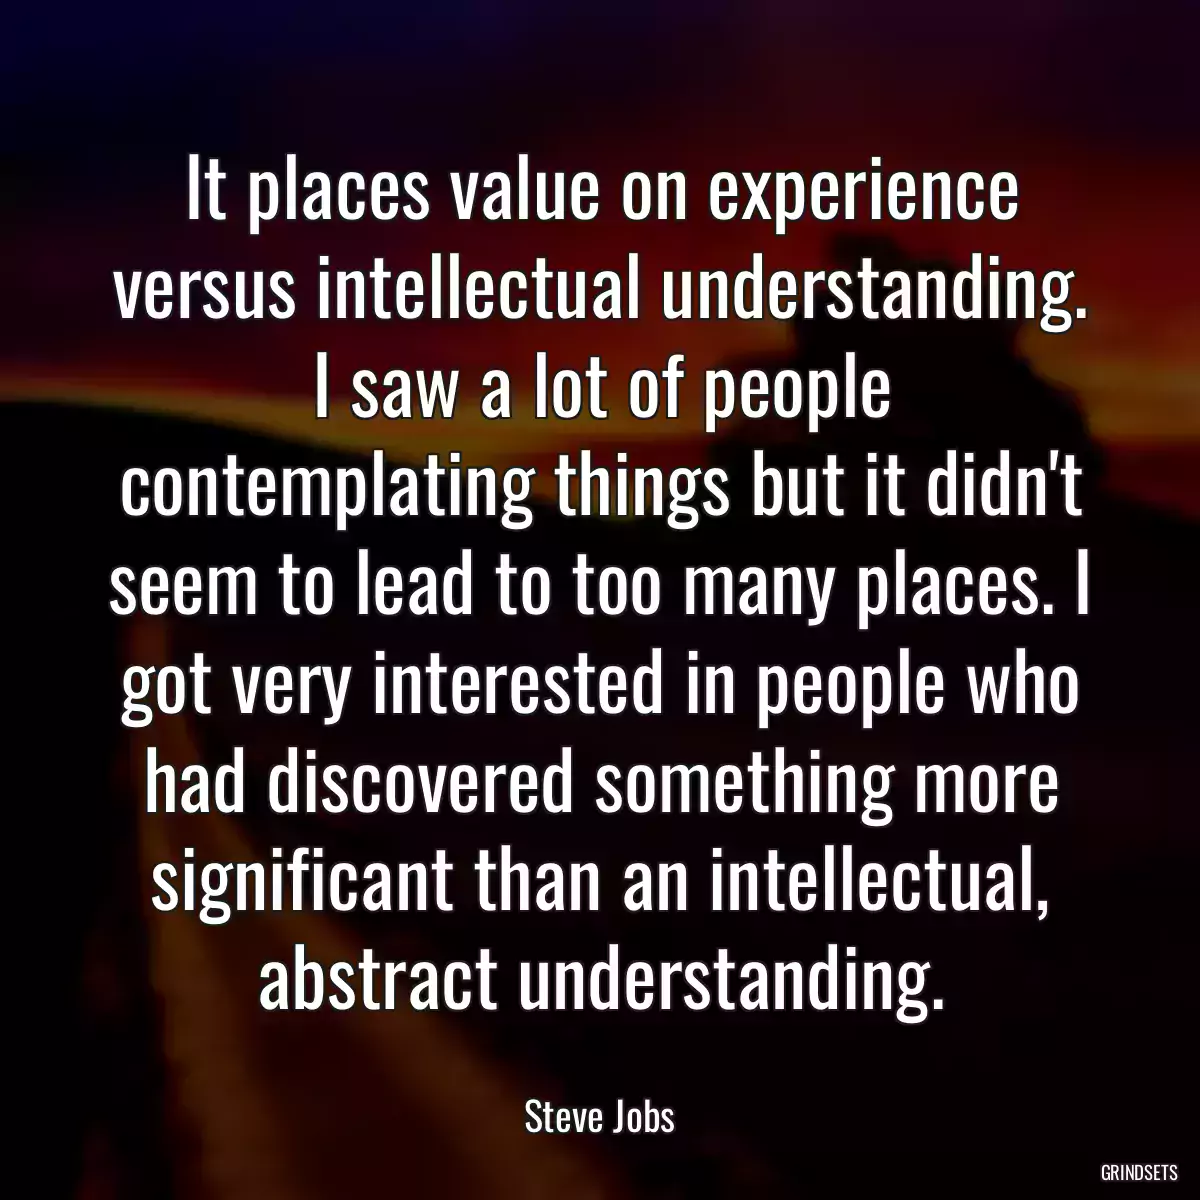 It places value on experience versus intellectual understanding. I saw a lot of people contemplating things but it didn\'t seem to lead to too many places. I got very interested in people who had discovered something more significant than an intellectual, abstract understanding.